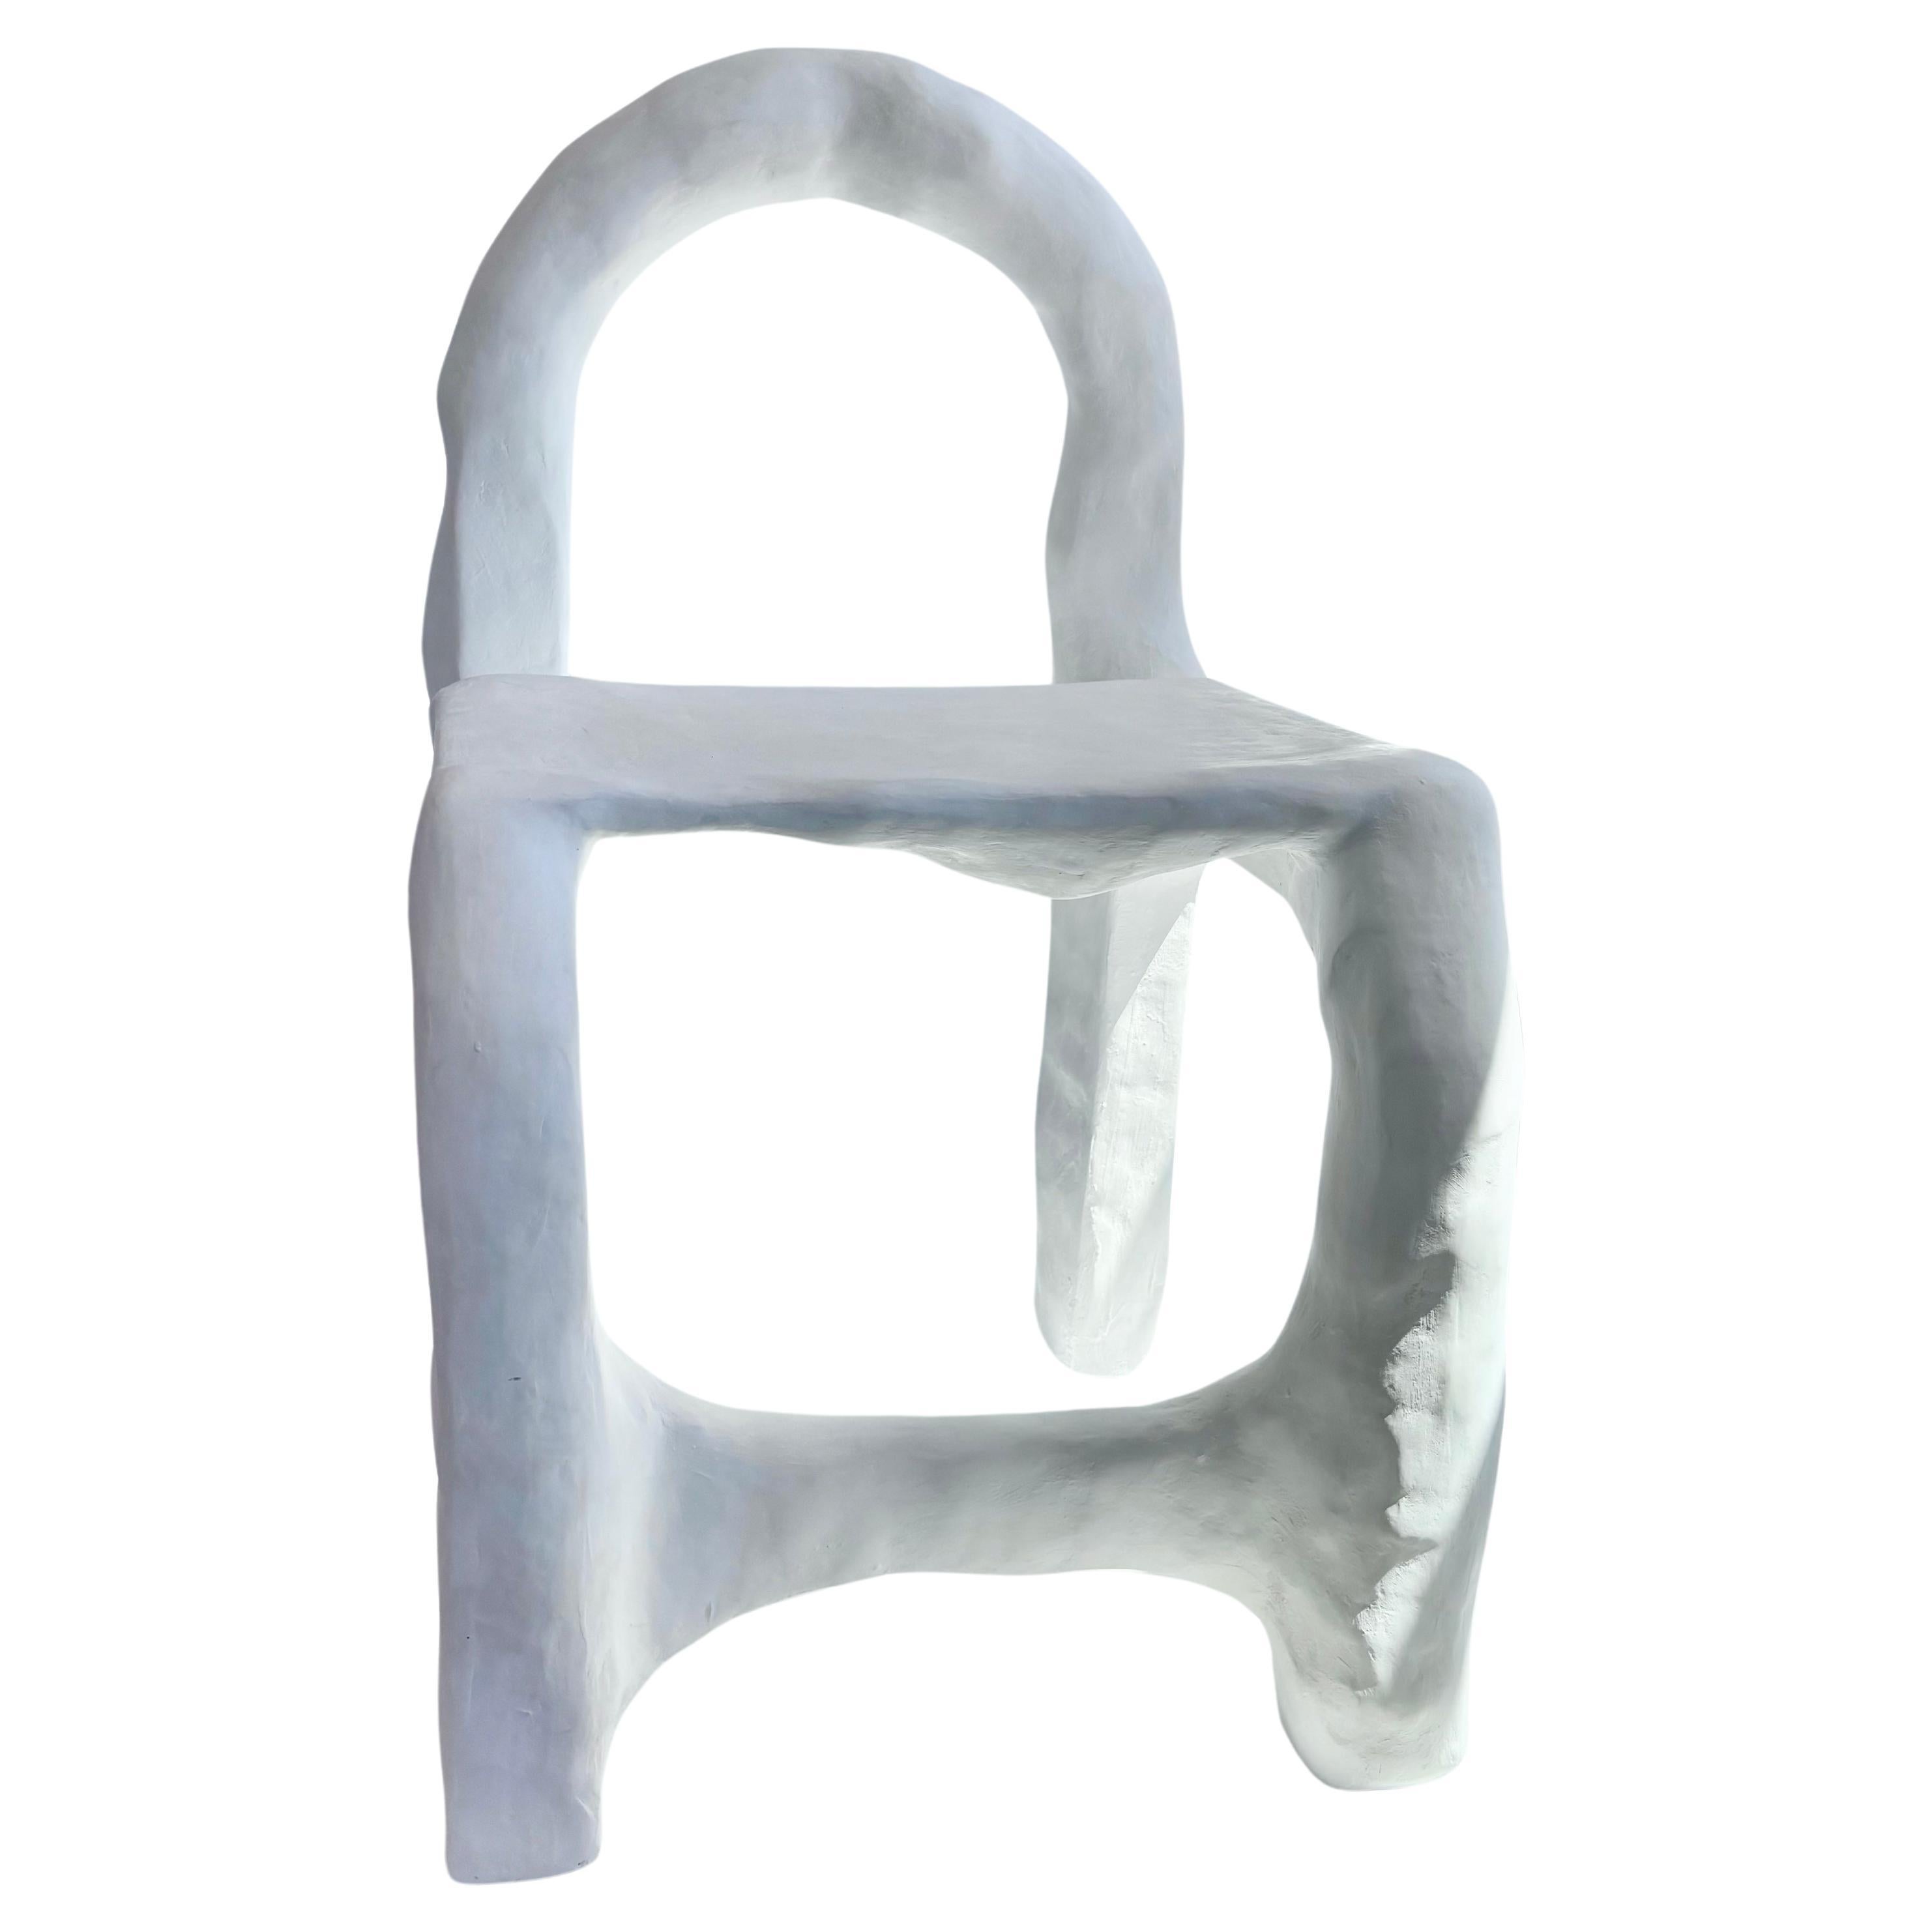 American Biomorphic Line by Studio Chora, Functional Sculpture, White Plaster Chair For Sale